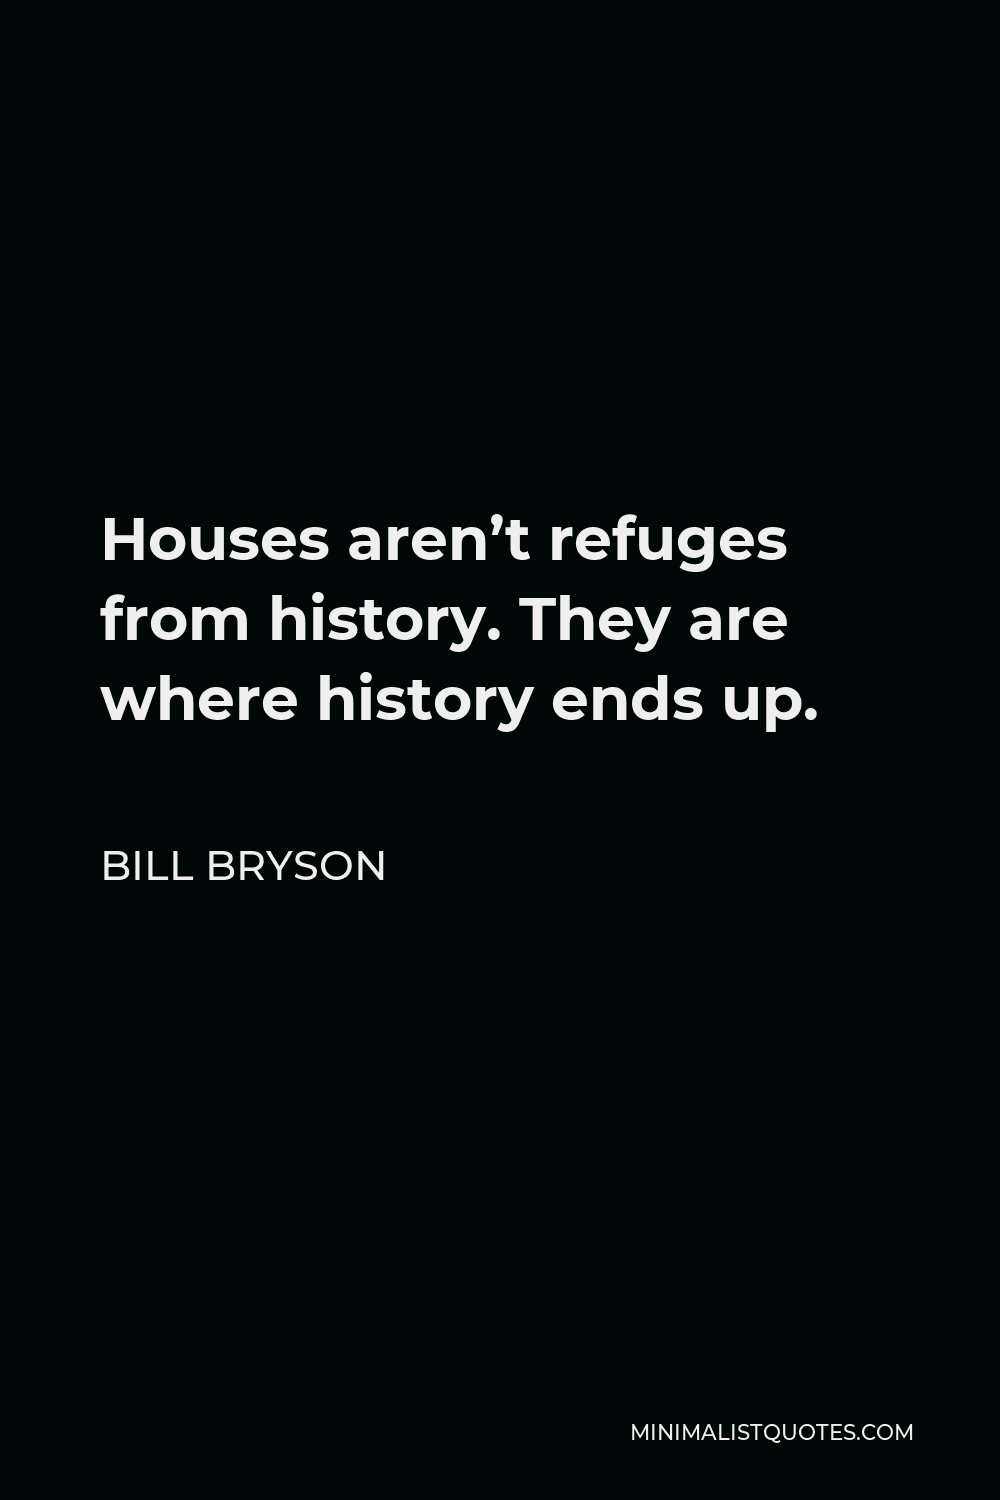 Bill Bryson Quote - Houses aren’t refuges from history. They are where history ends up.